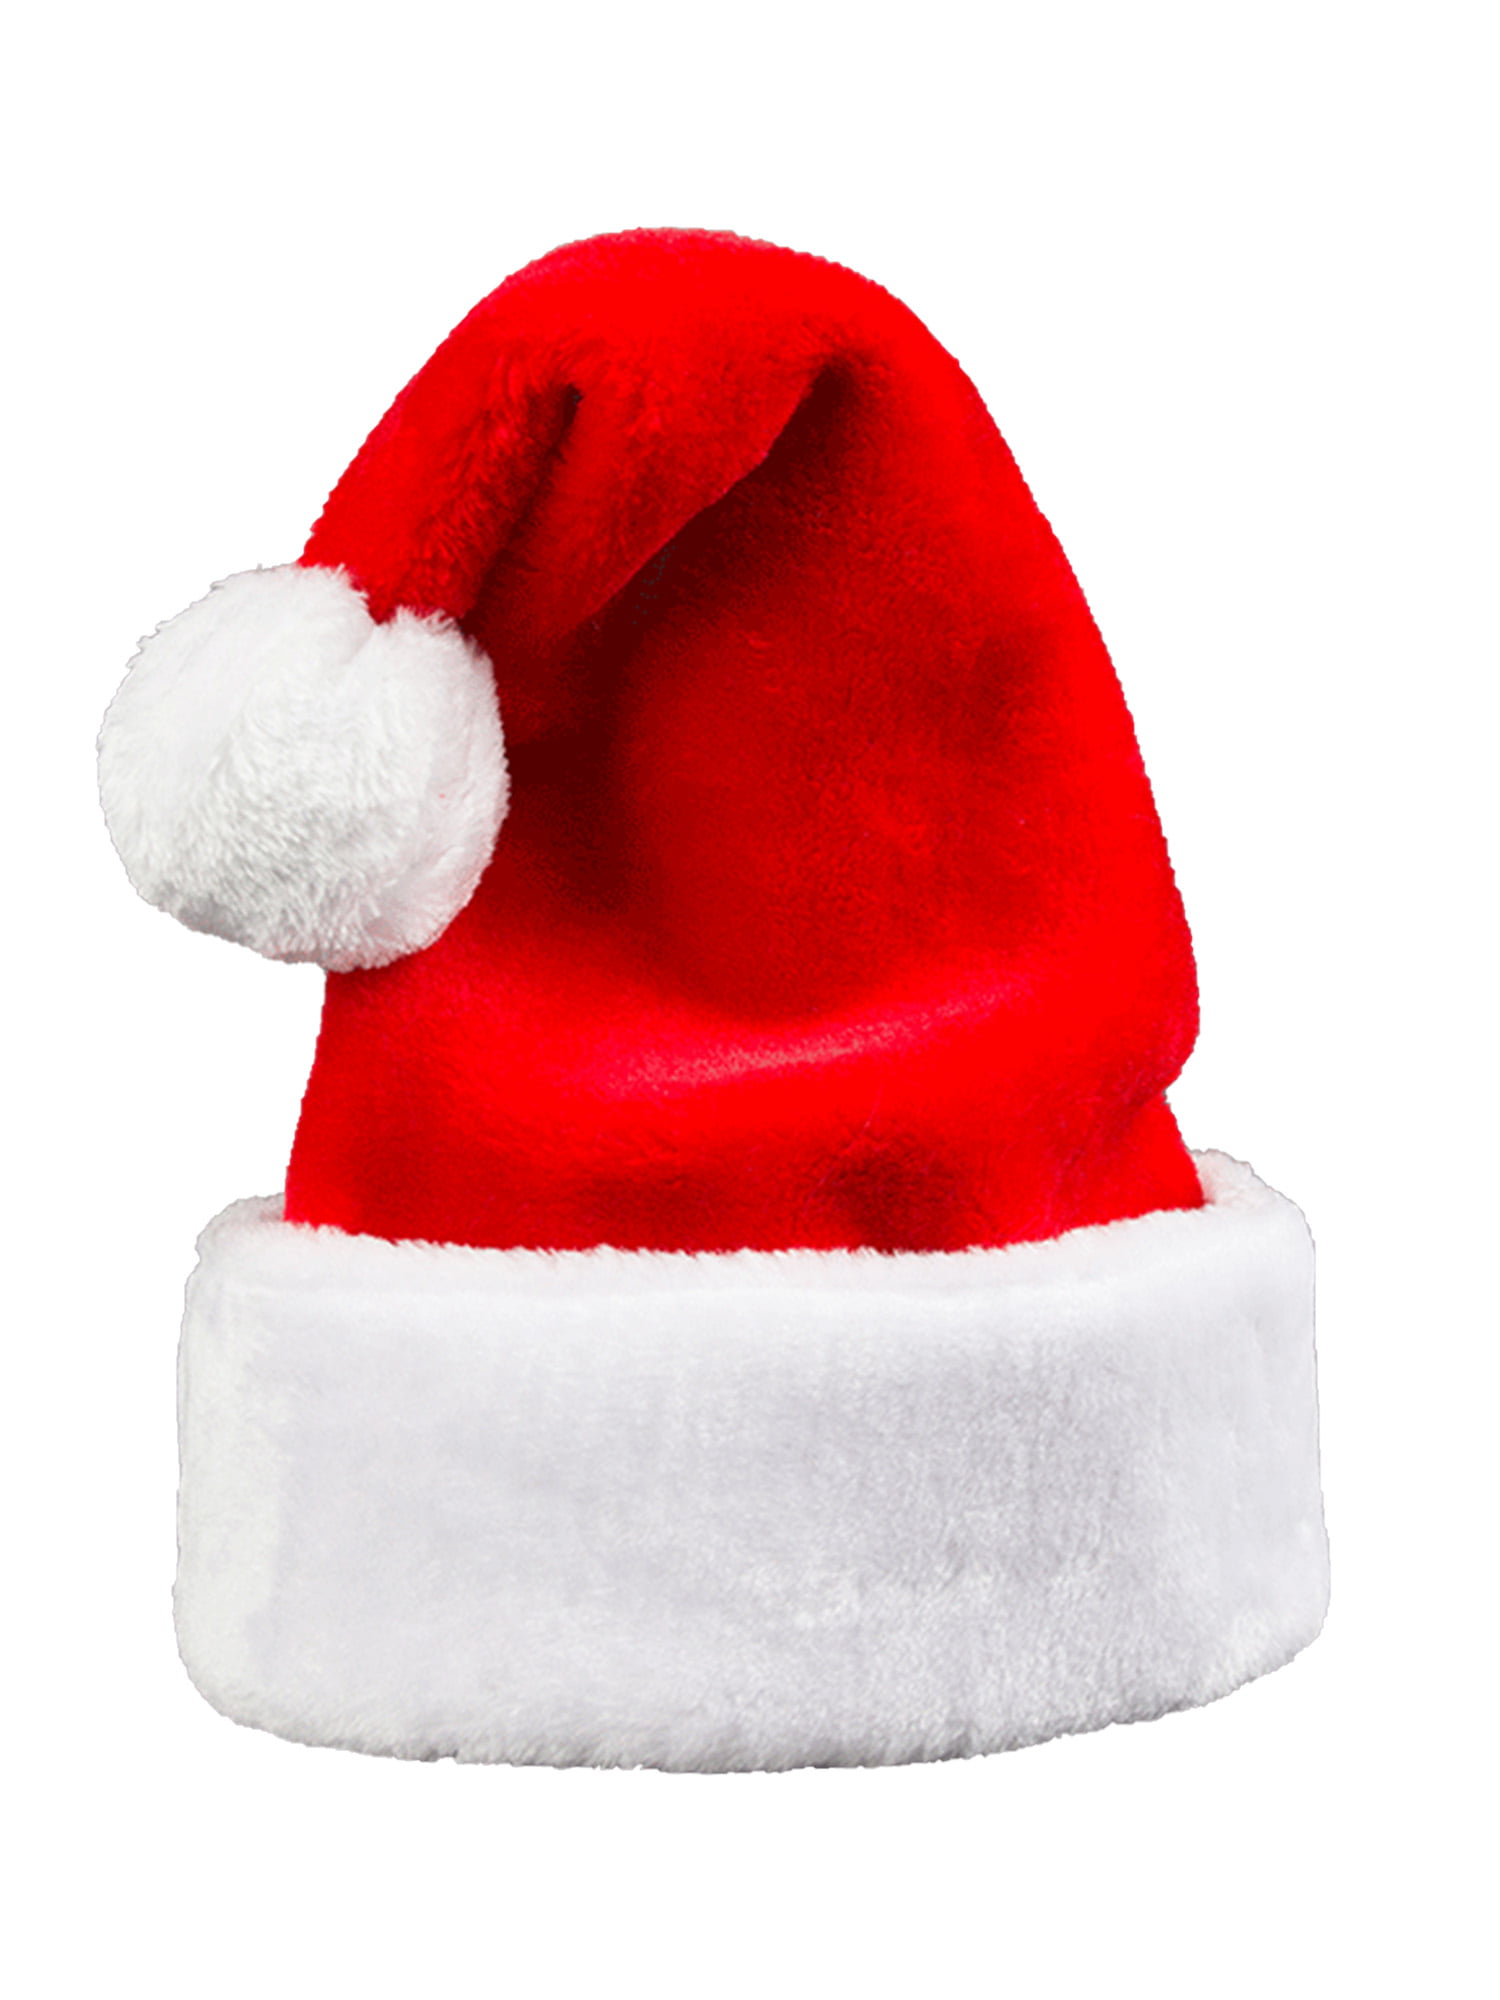 FATHER CHRISTMAS RED SANTA HAT XMAS OFFICE PARTY ACCESSORY HATS 